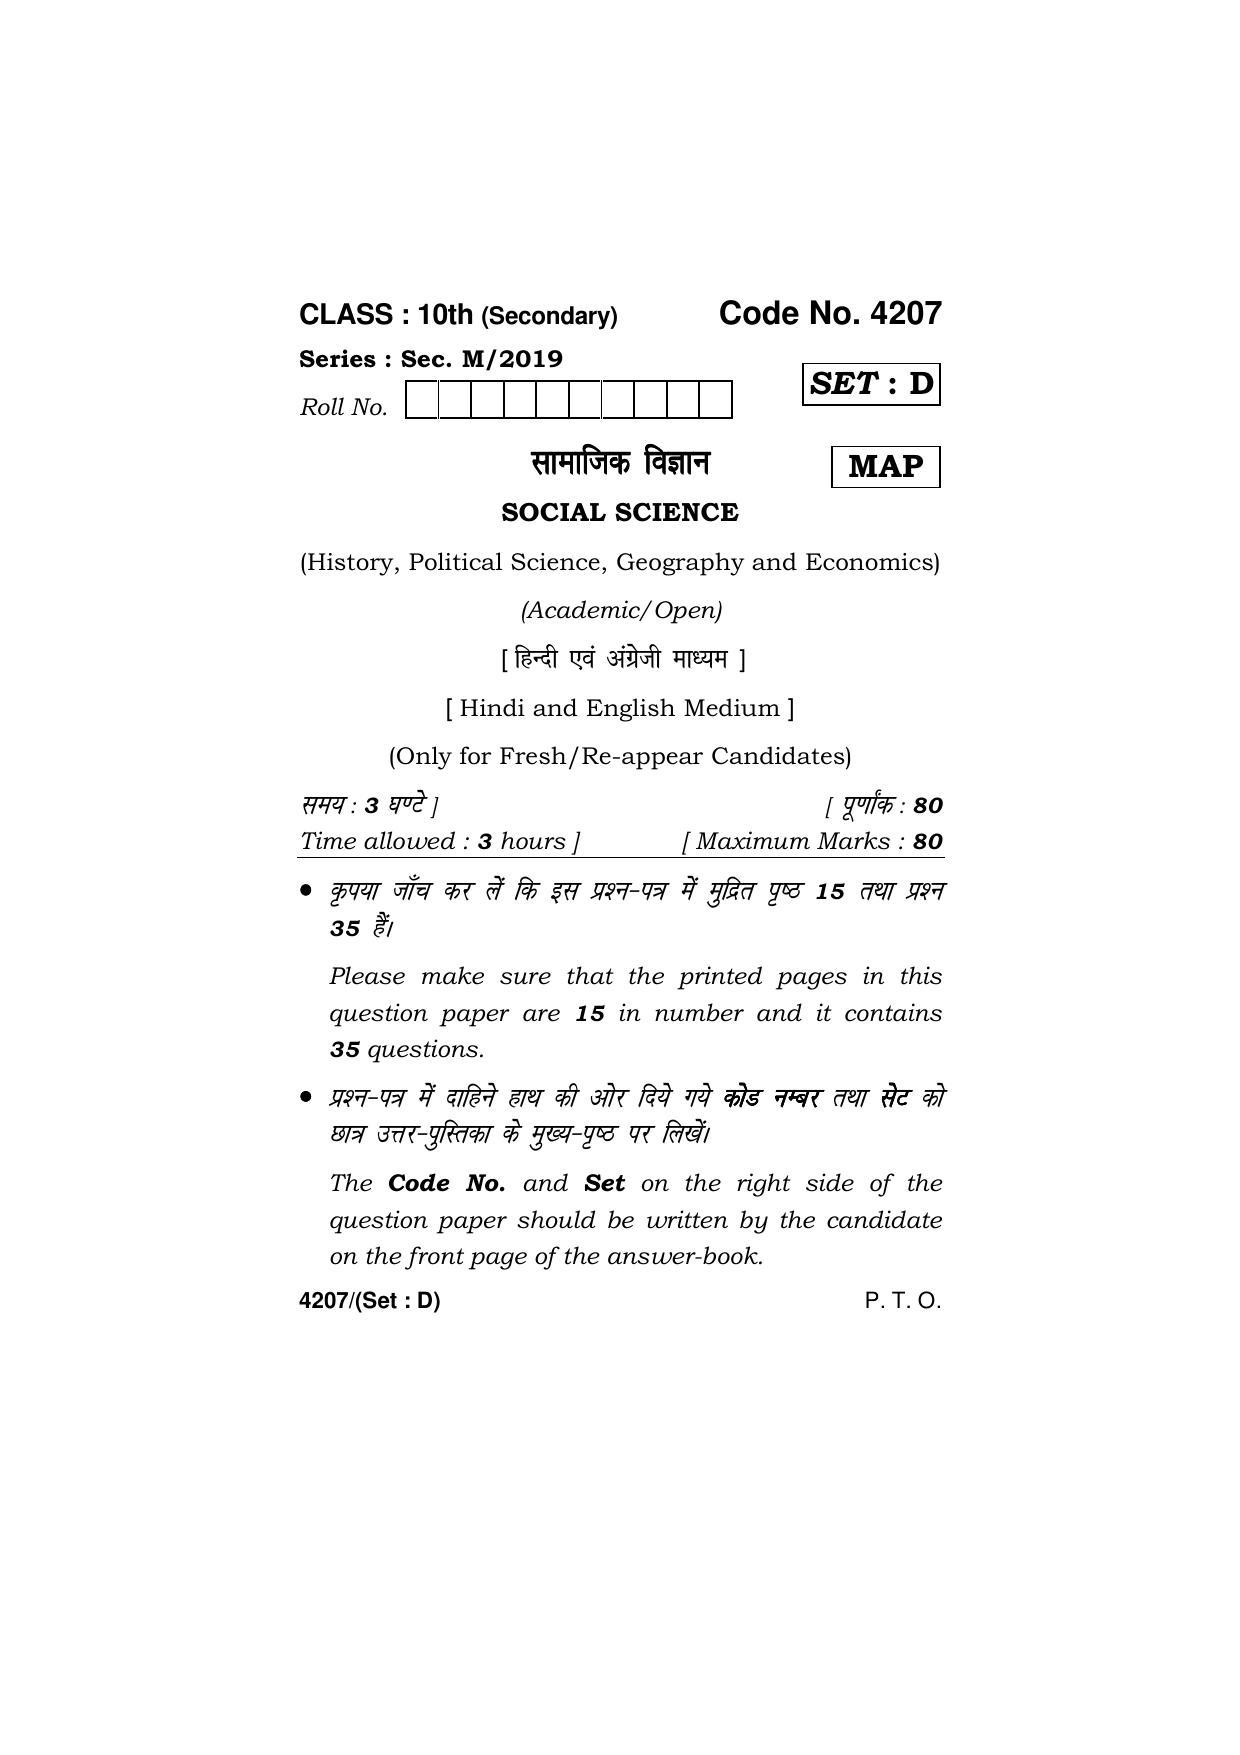 Haryana Board HBSE Class 10 Social Science (All Set) 2019 Question Paper - Page 46